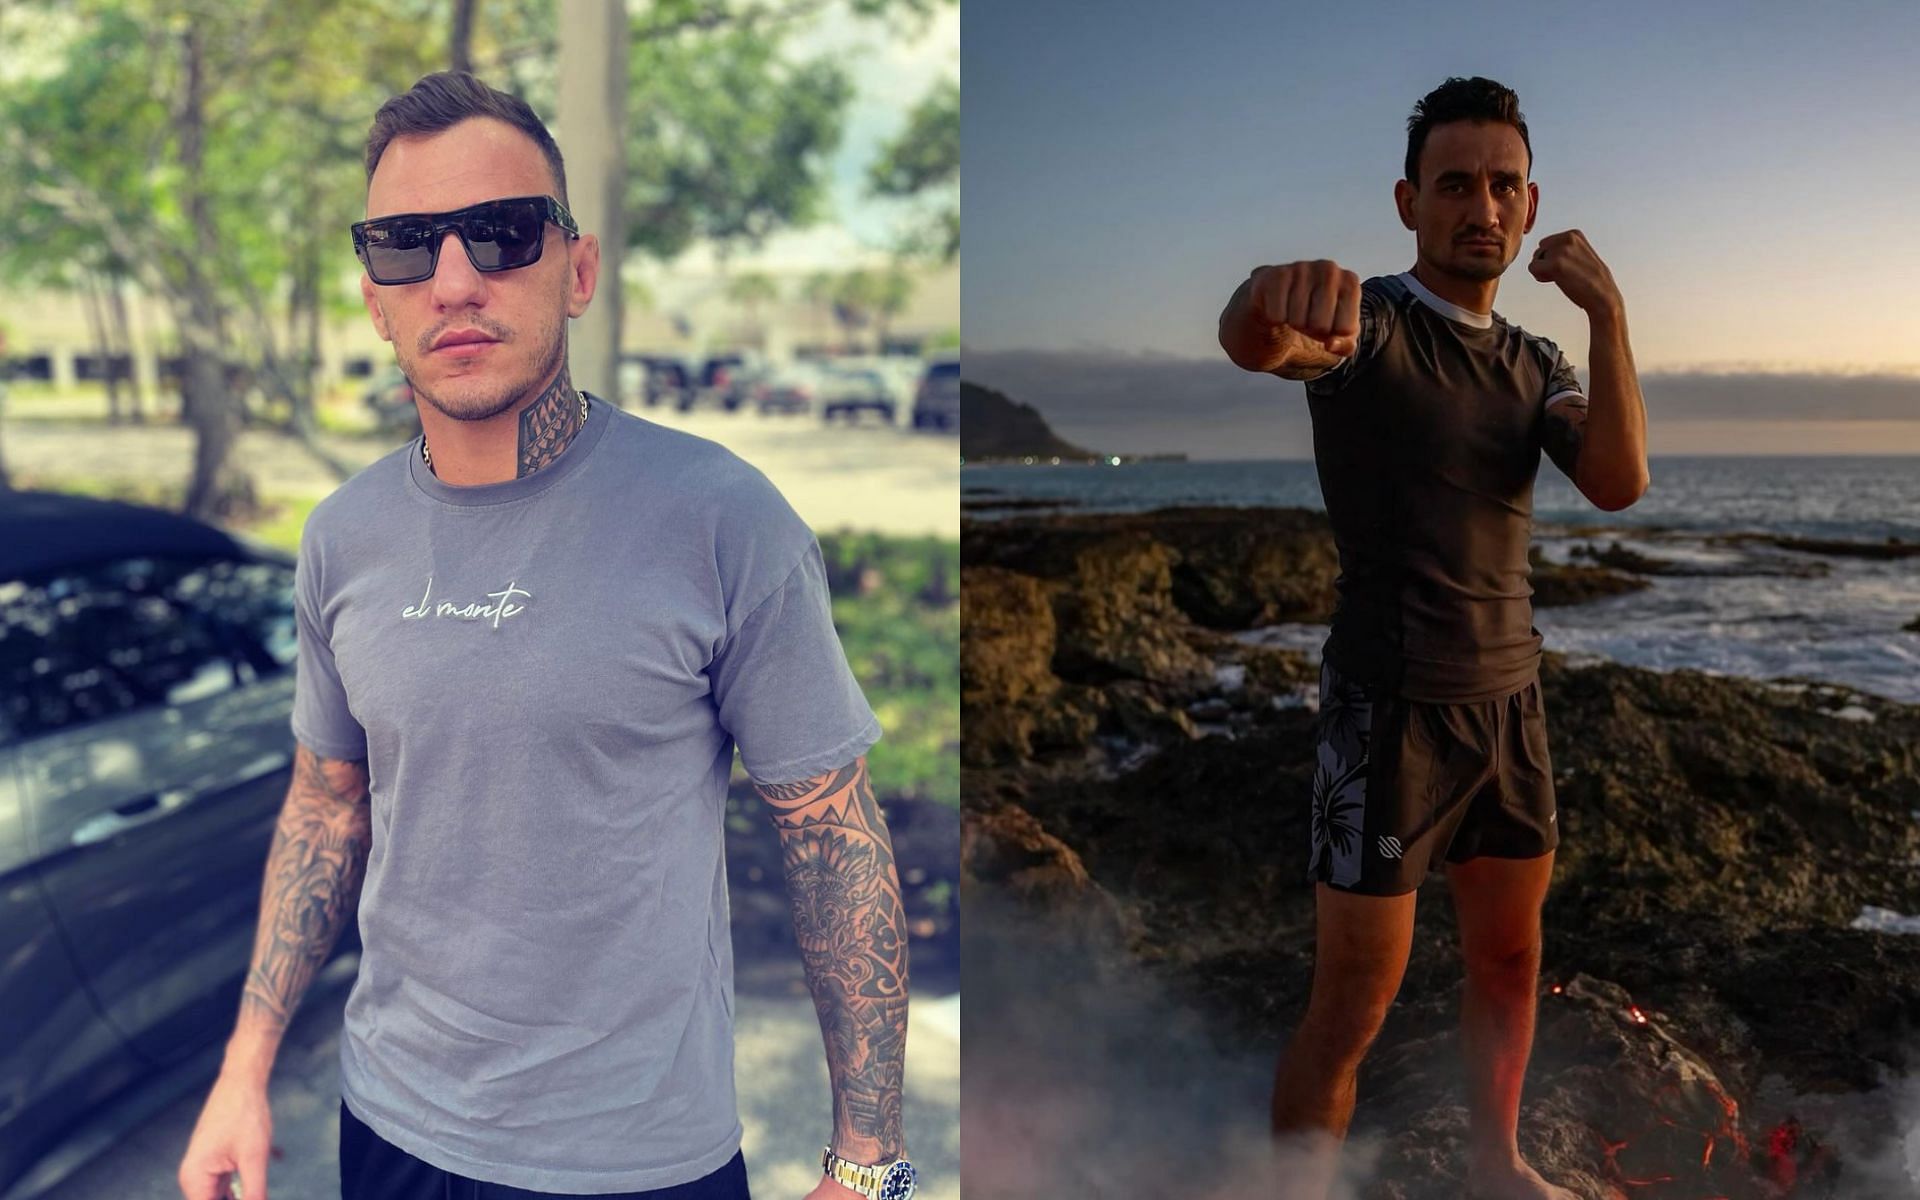 Renato Moicano (left) explains desire for Max Holloway (right) to win UFC 300 bout [Photo Courtesy @renato_moicano_ufc and @blessedmma on Instagram]